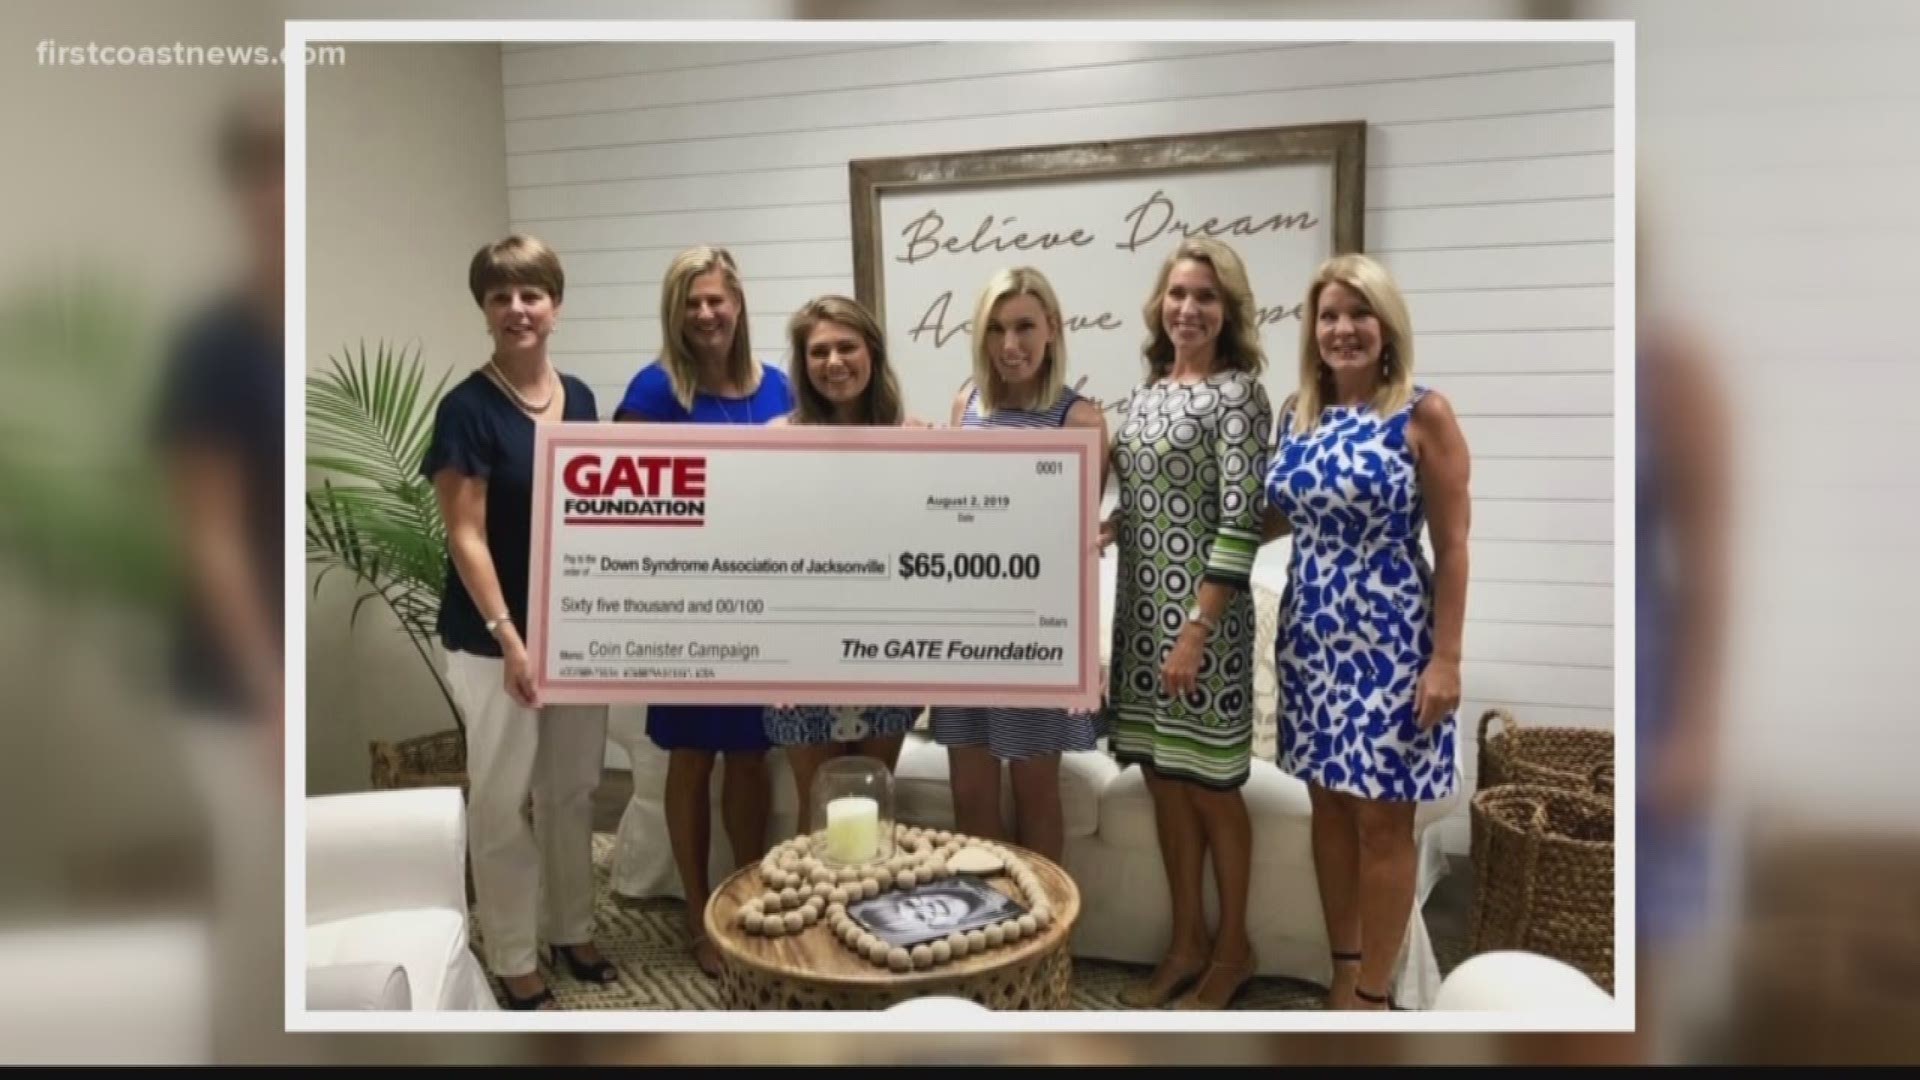 The Down Syndrome Association of Jacksonville received a donation of $65,000 from the GATE Foundation. DSAJ will use the money to help change and improve the lives of individuals with Down Syndrome in Jacksonville.